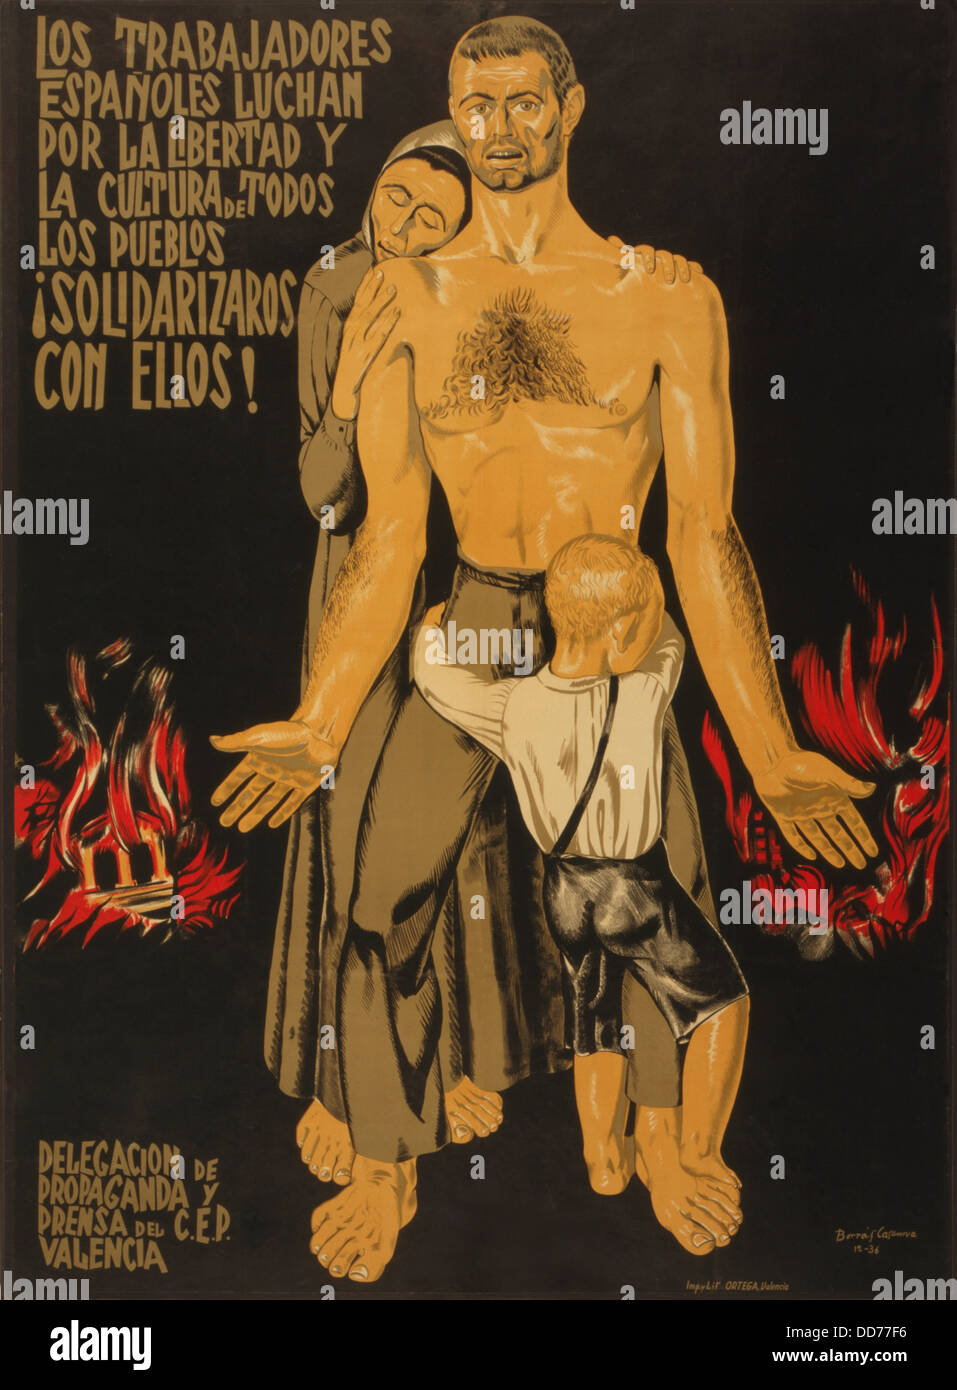 SPANISH WORKERS FIGHT FOR THE FREEDOM AND THE CULTURE OF ALL TOWNS. SOLIDARITY WITH THEM. 1936 Spanish Civil War poster Stock Photo